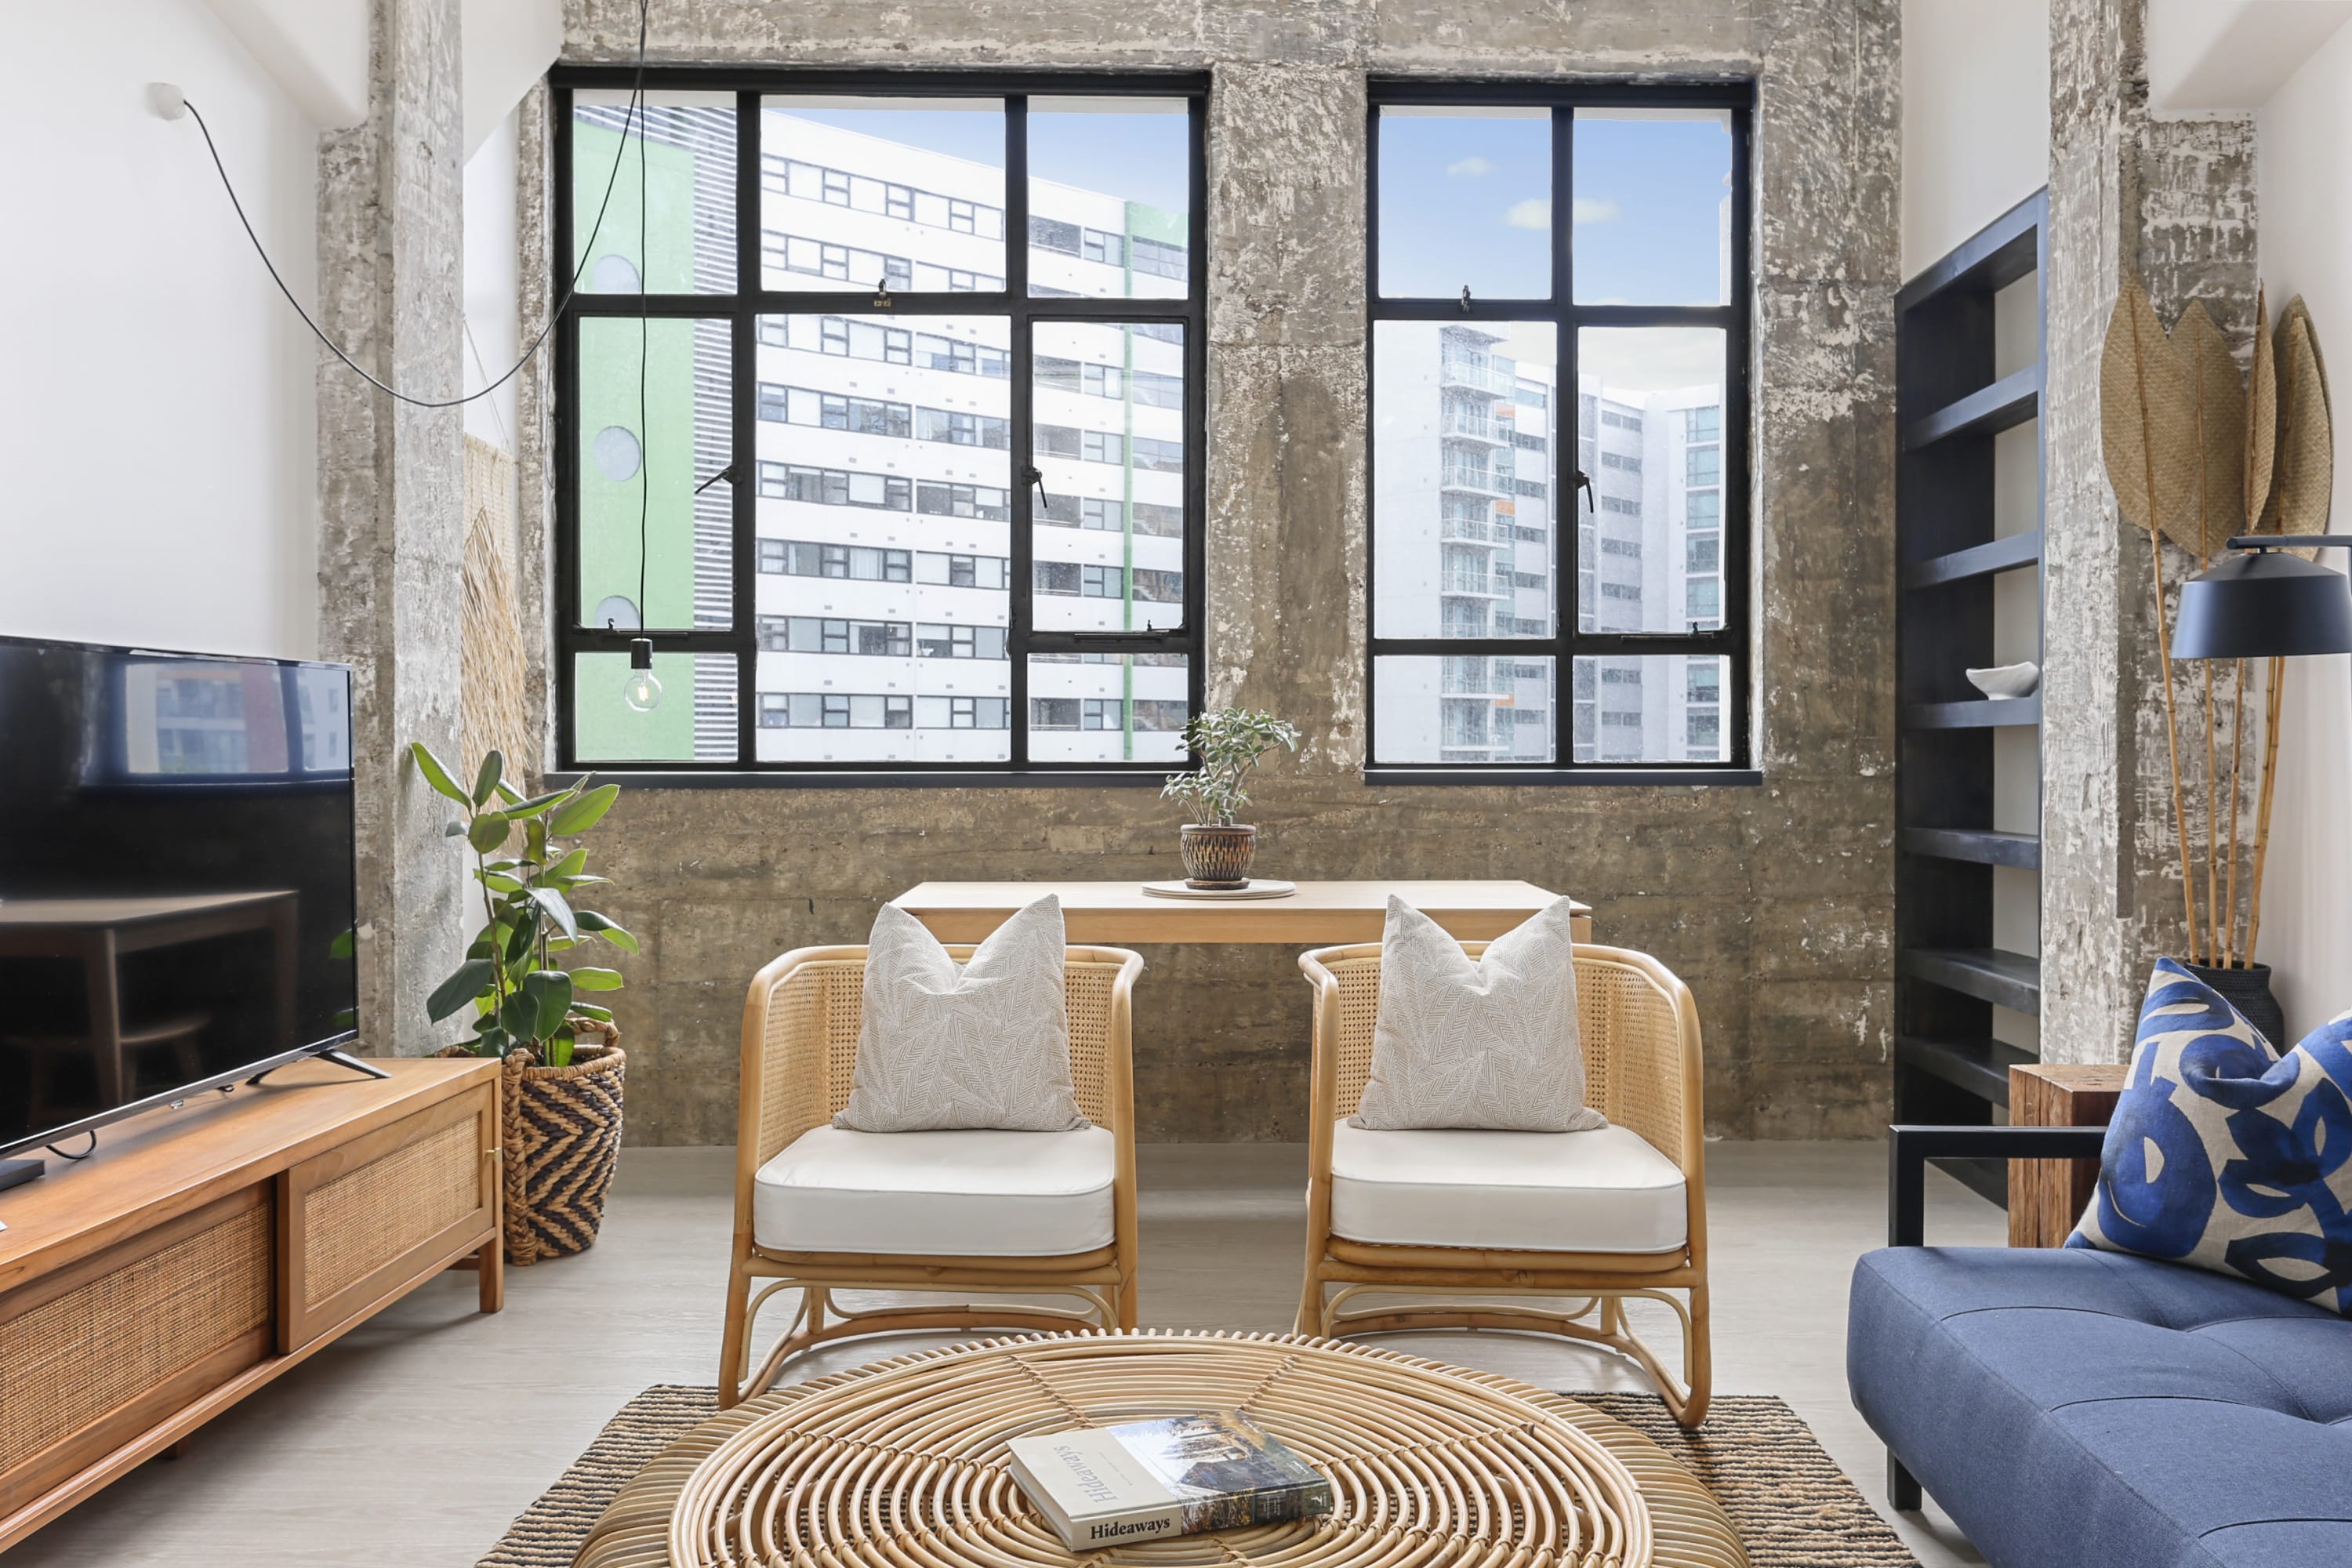 Luxurious Bohemian style apartment in Britomart - Image 3